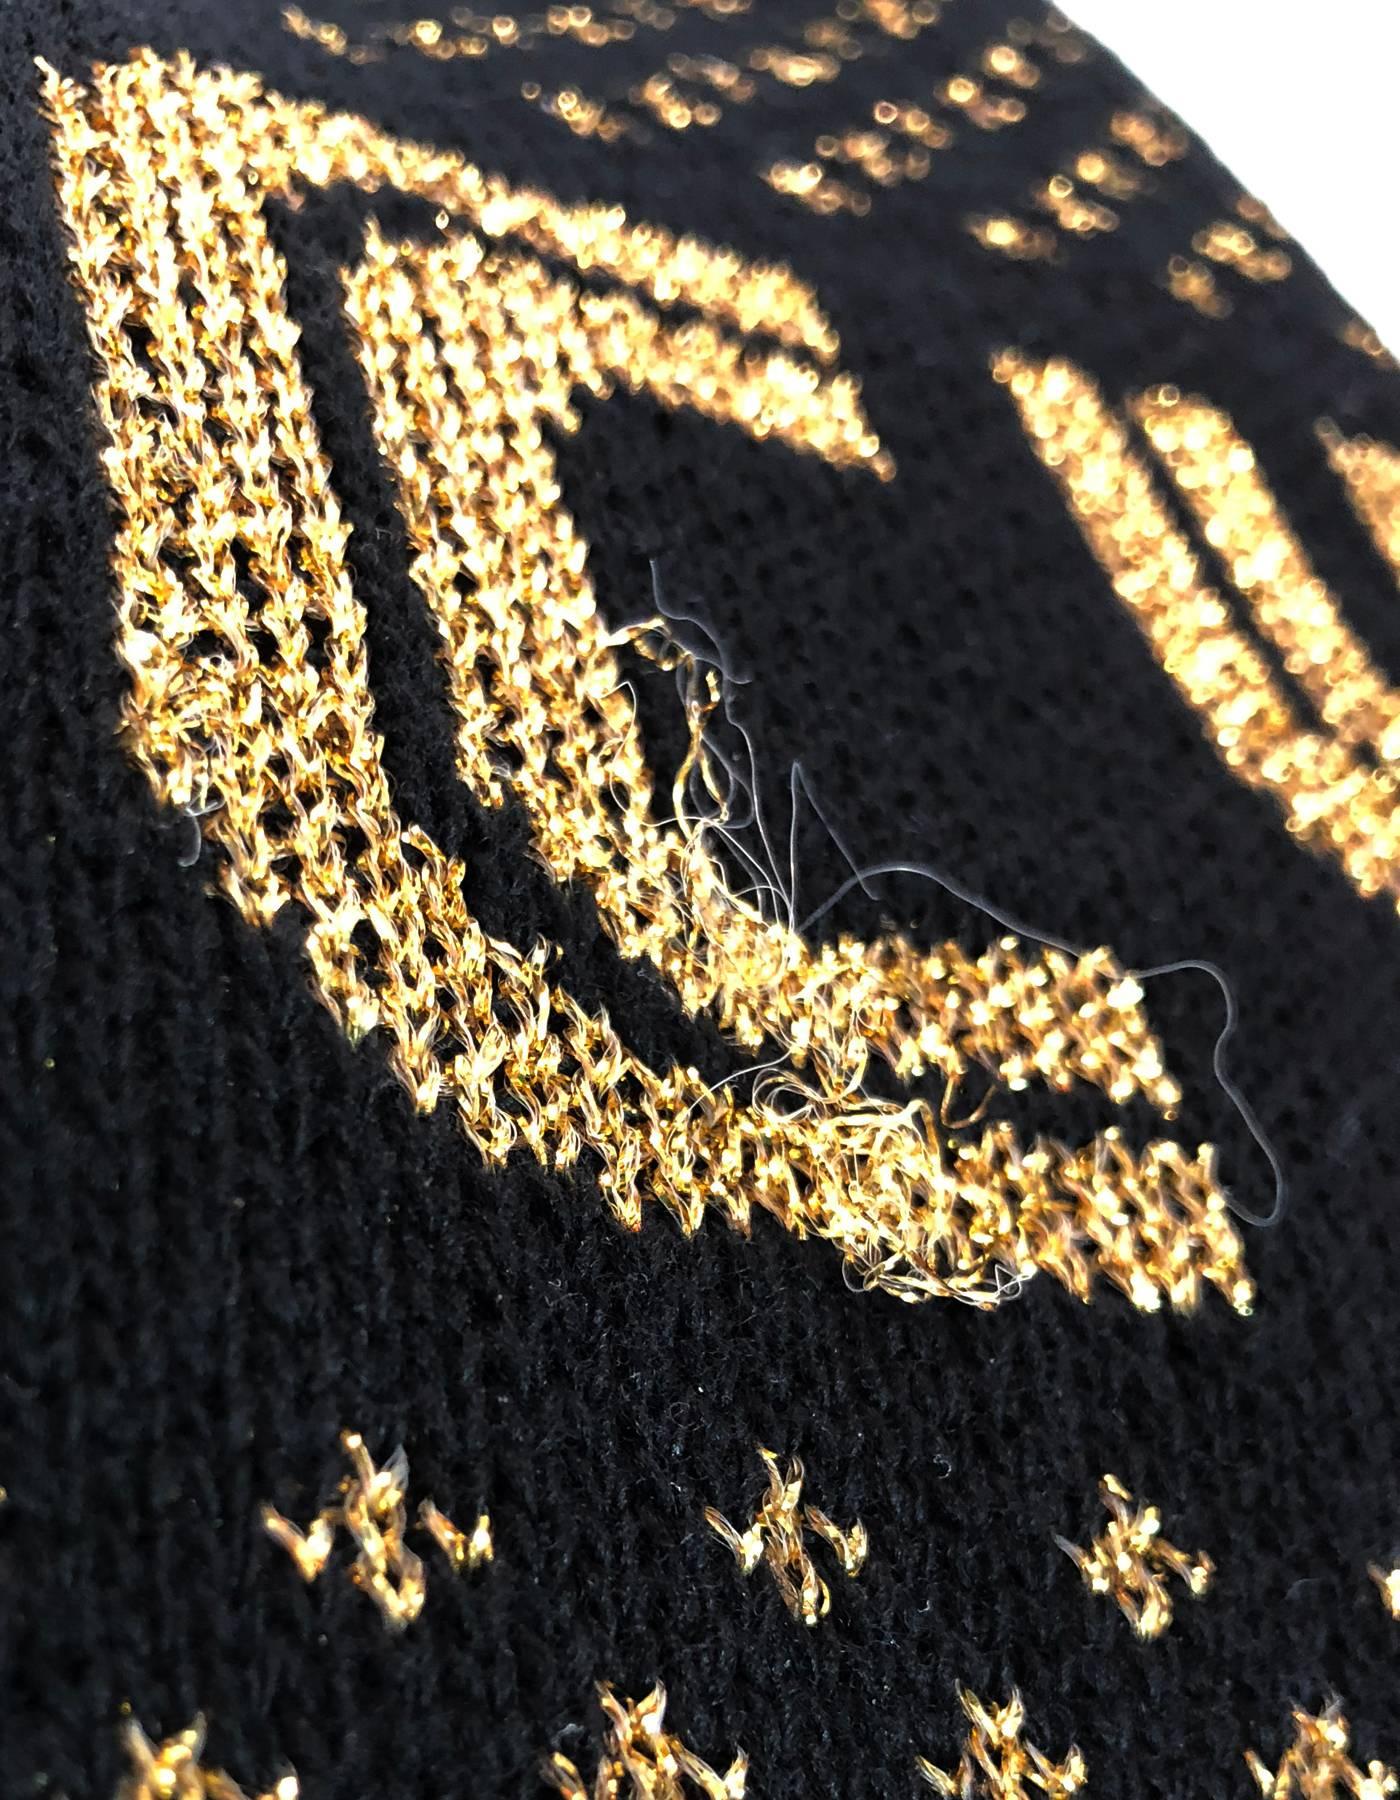 black and gold sweater